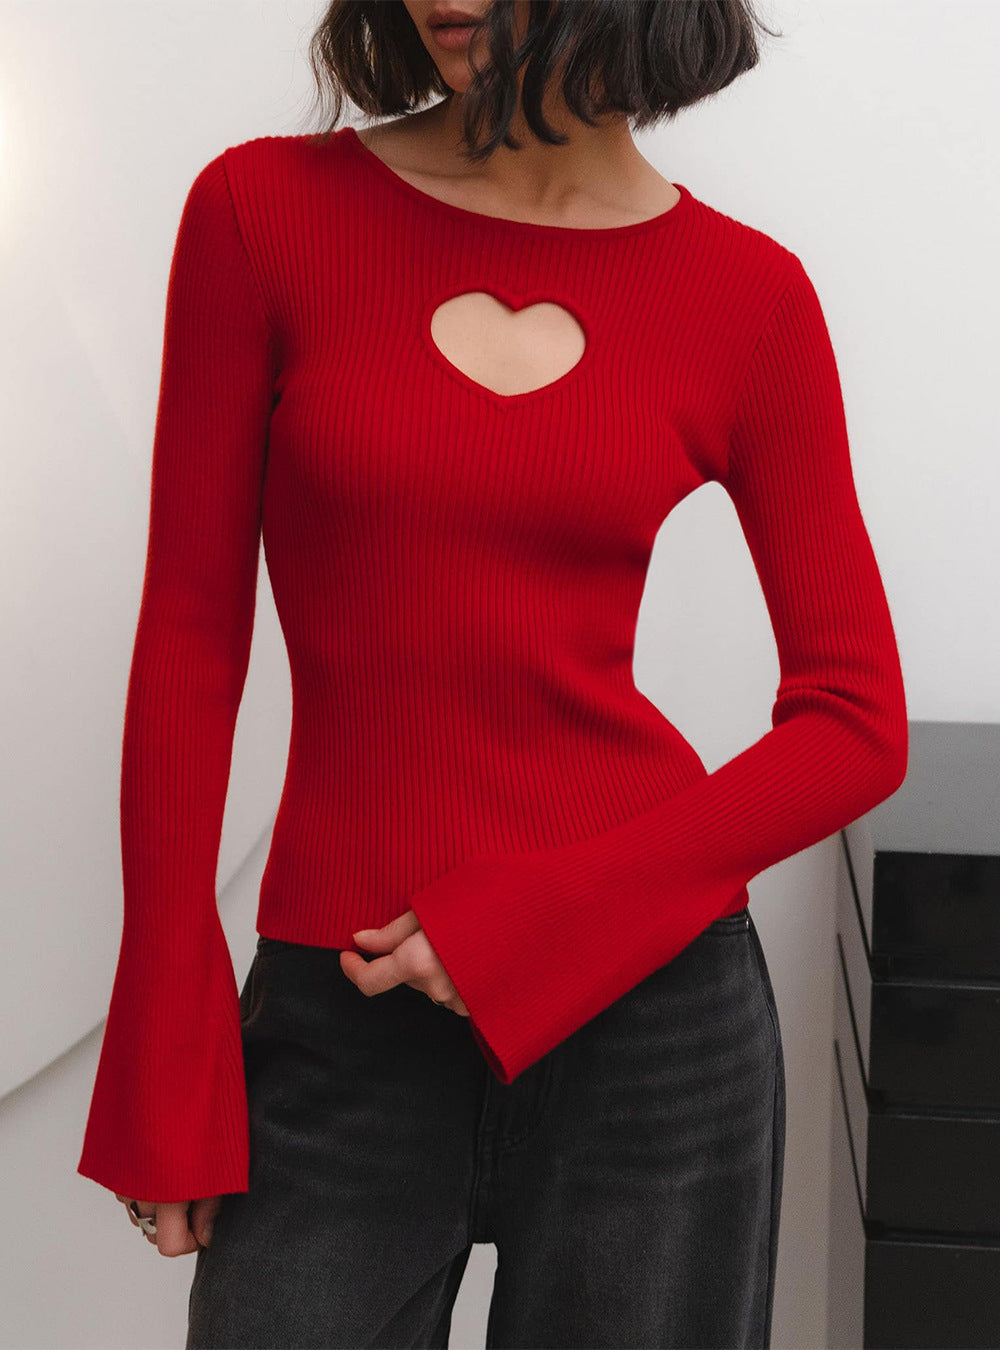 Love hollow knitted short top sweater